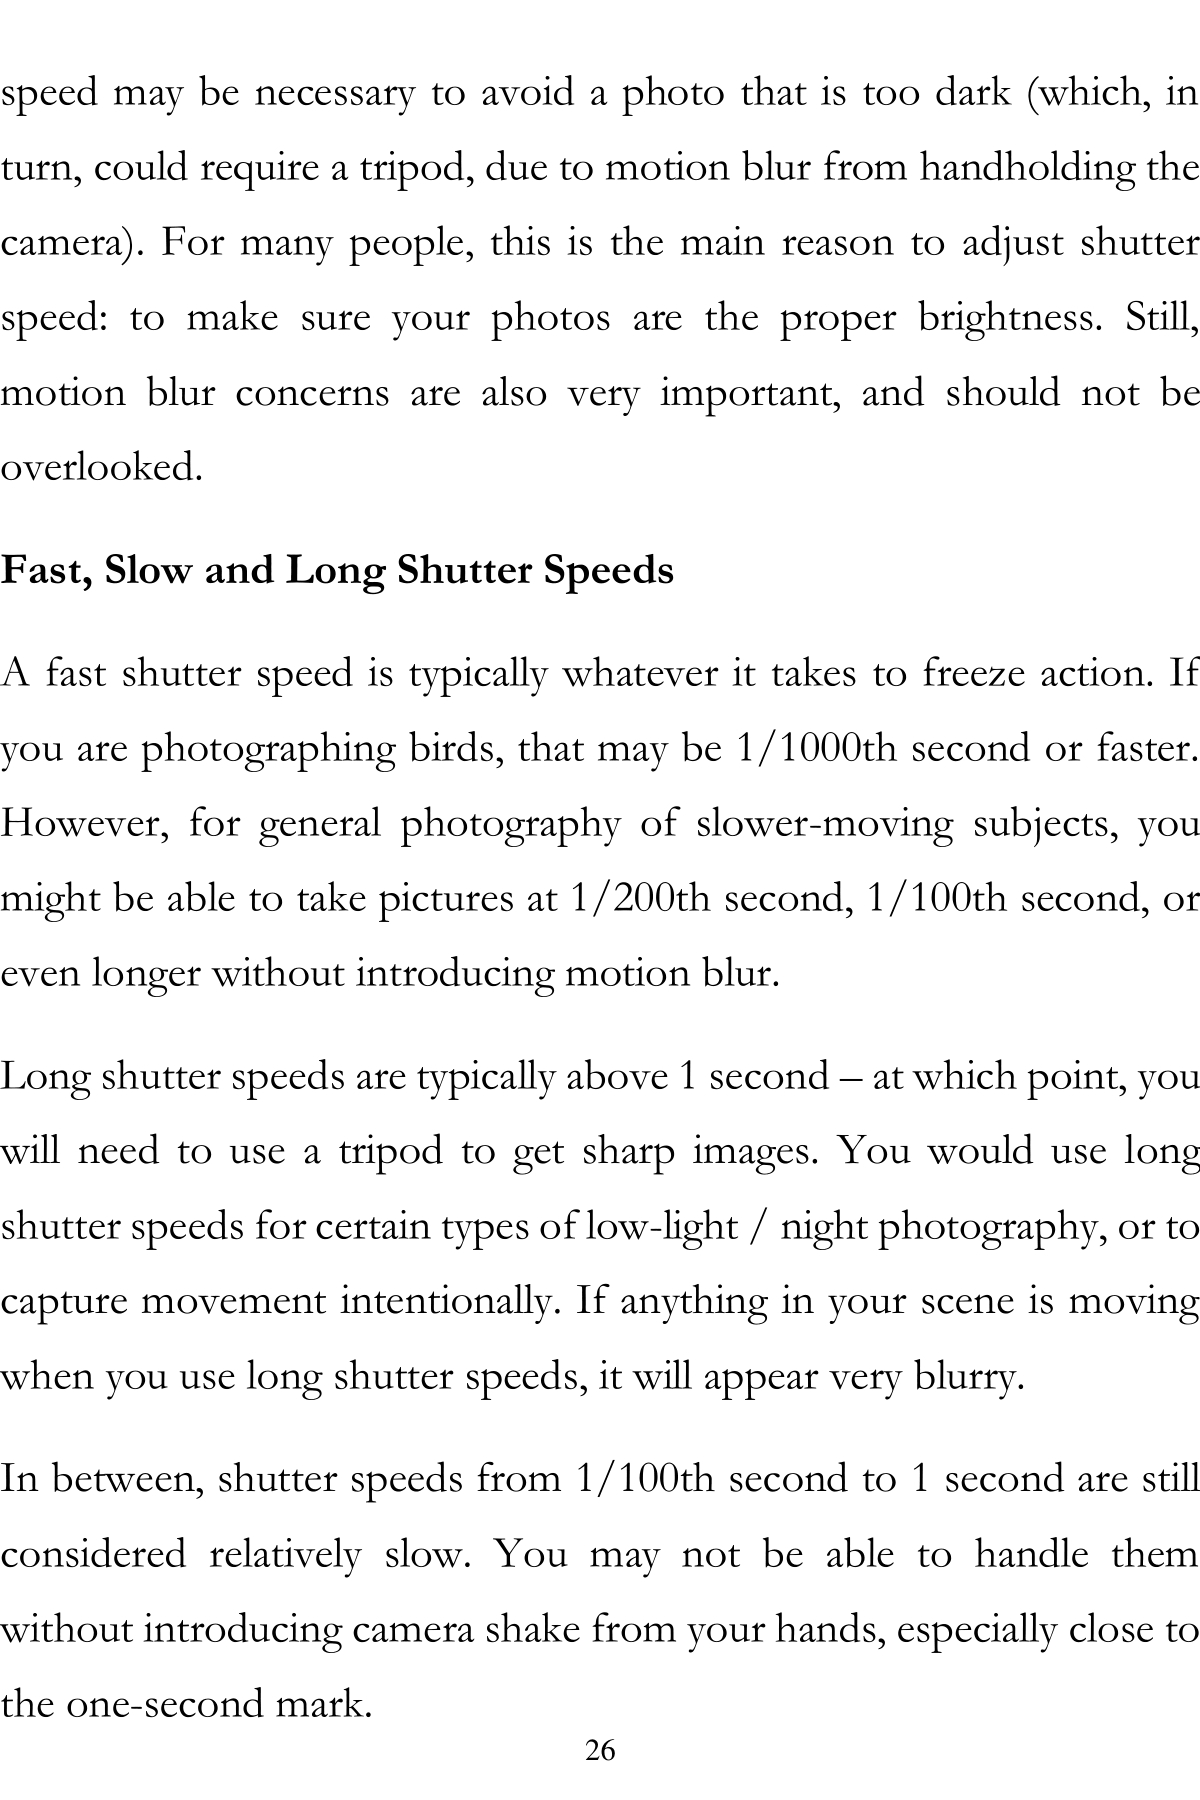 Photography Lessons A Basic Step-By-Step Guide To Taking A Great Photo The Photography Book - photo 25